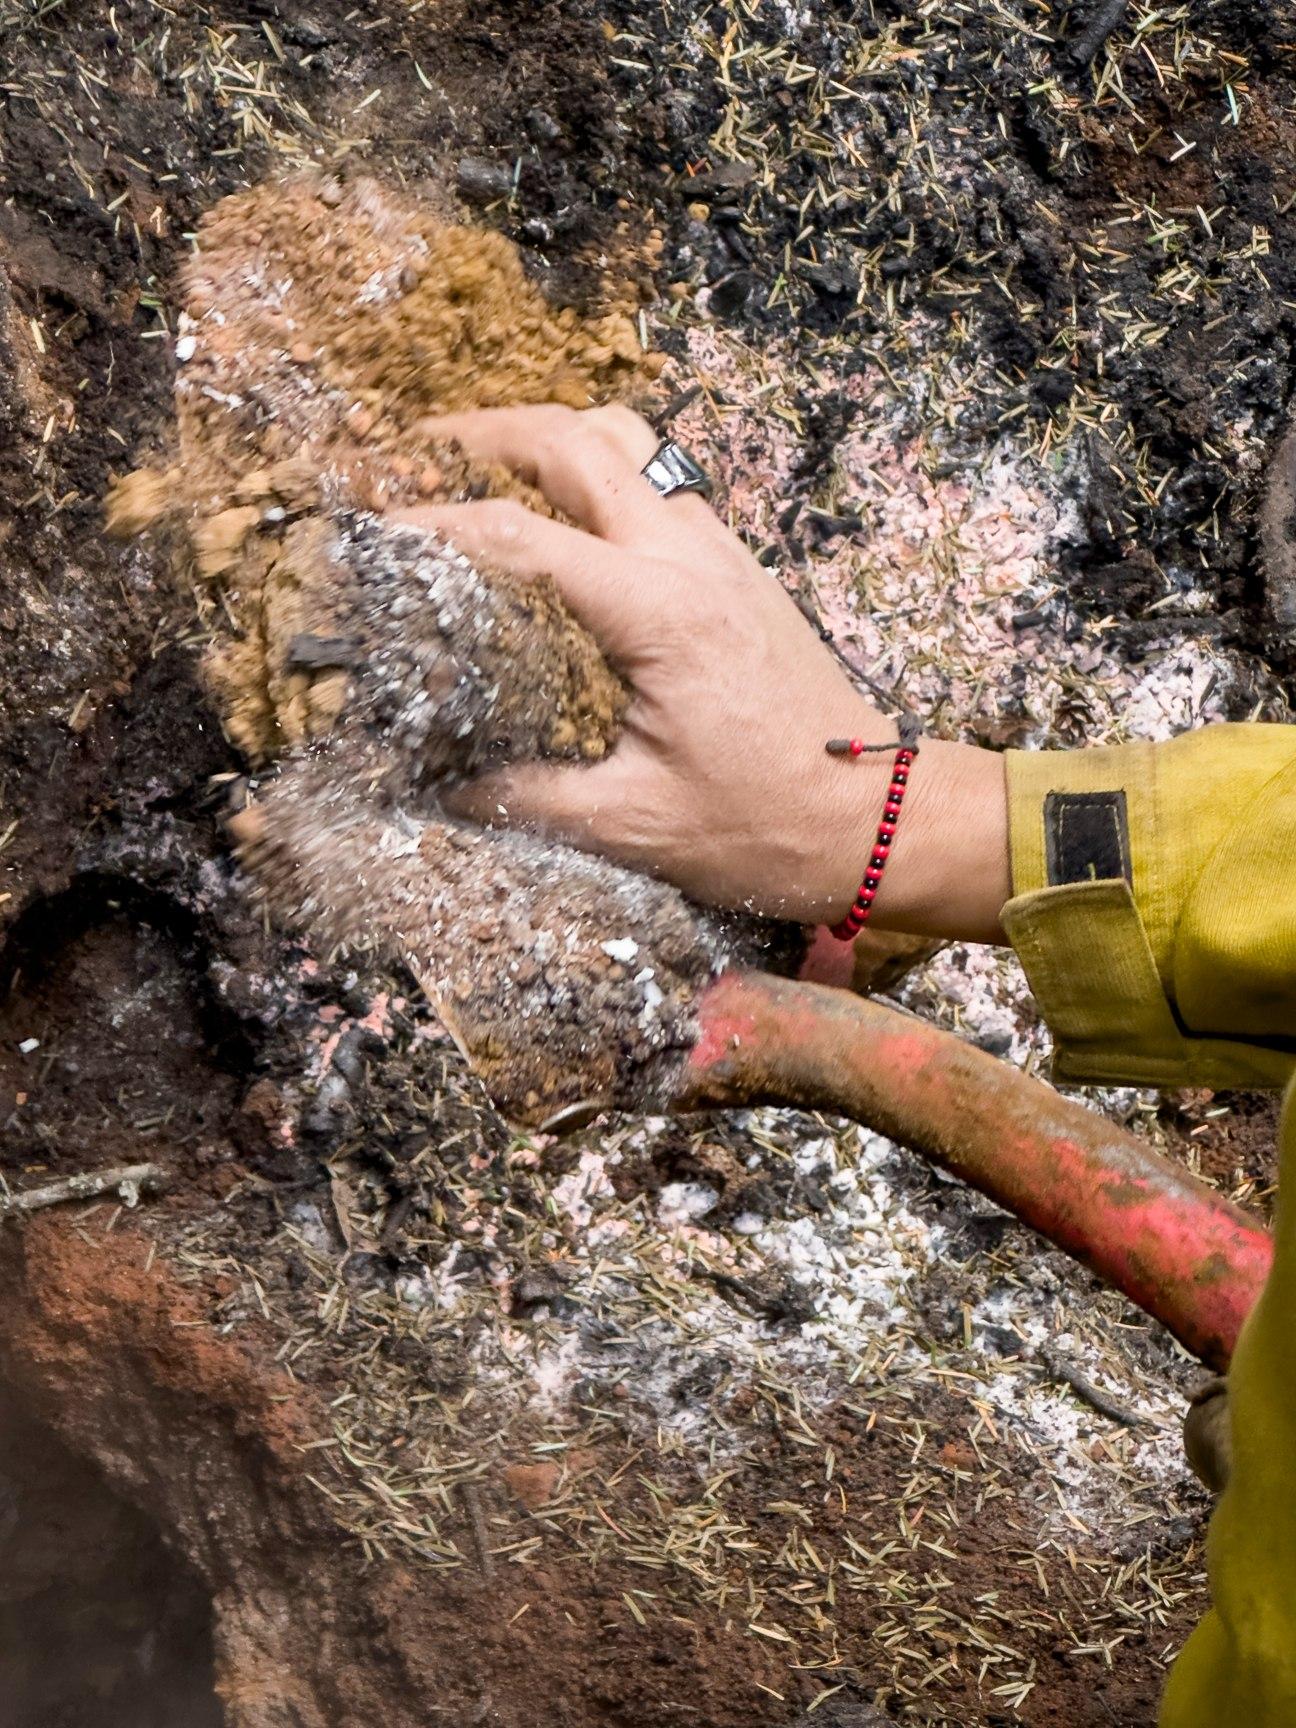 A hand is placed in the soil to understand whether heat still exisits